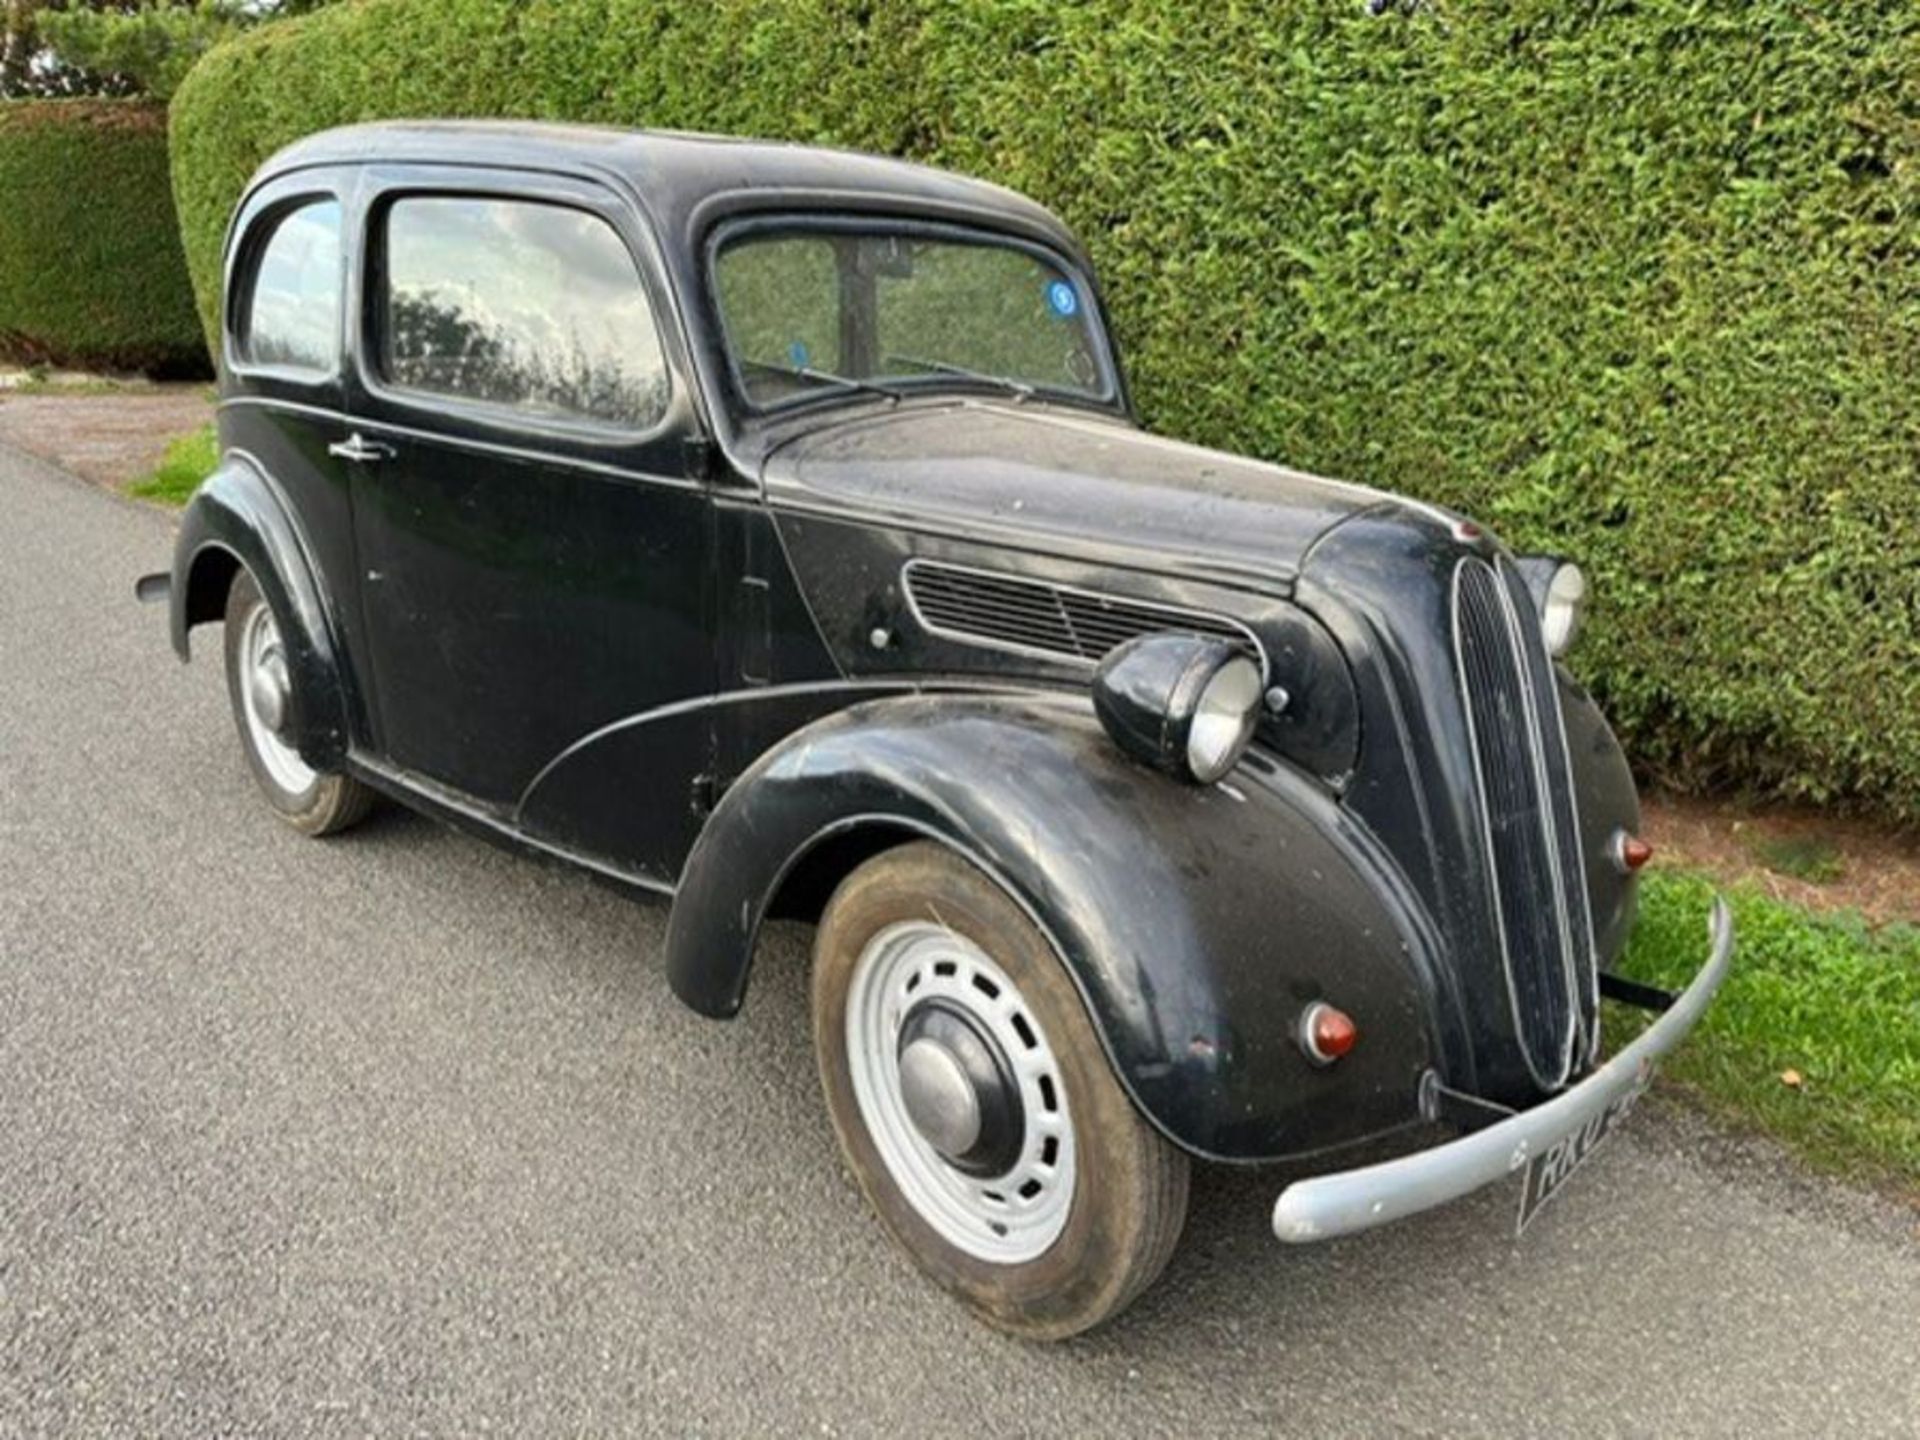 1953 Ford Anglia. A very late registered example, this charming little Anglia appears largely